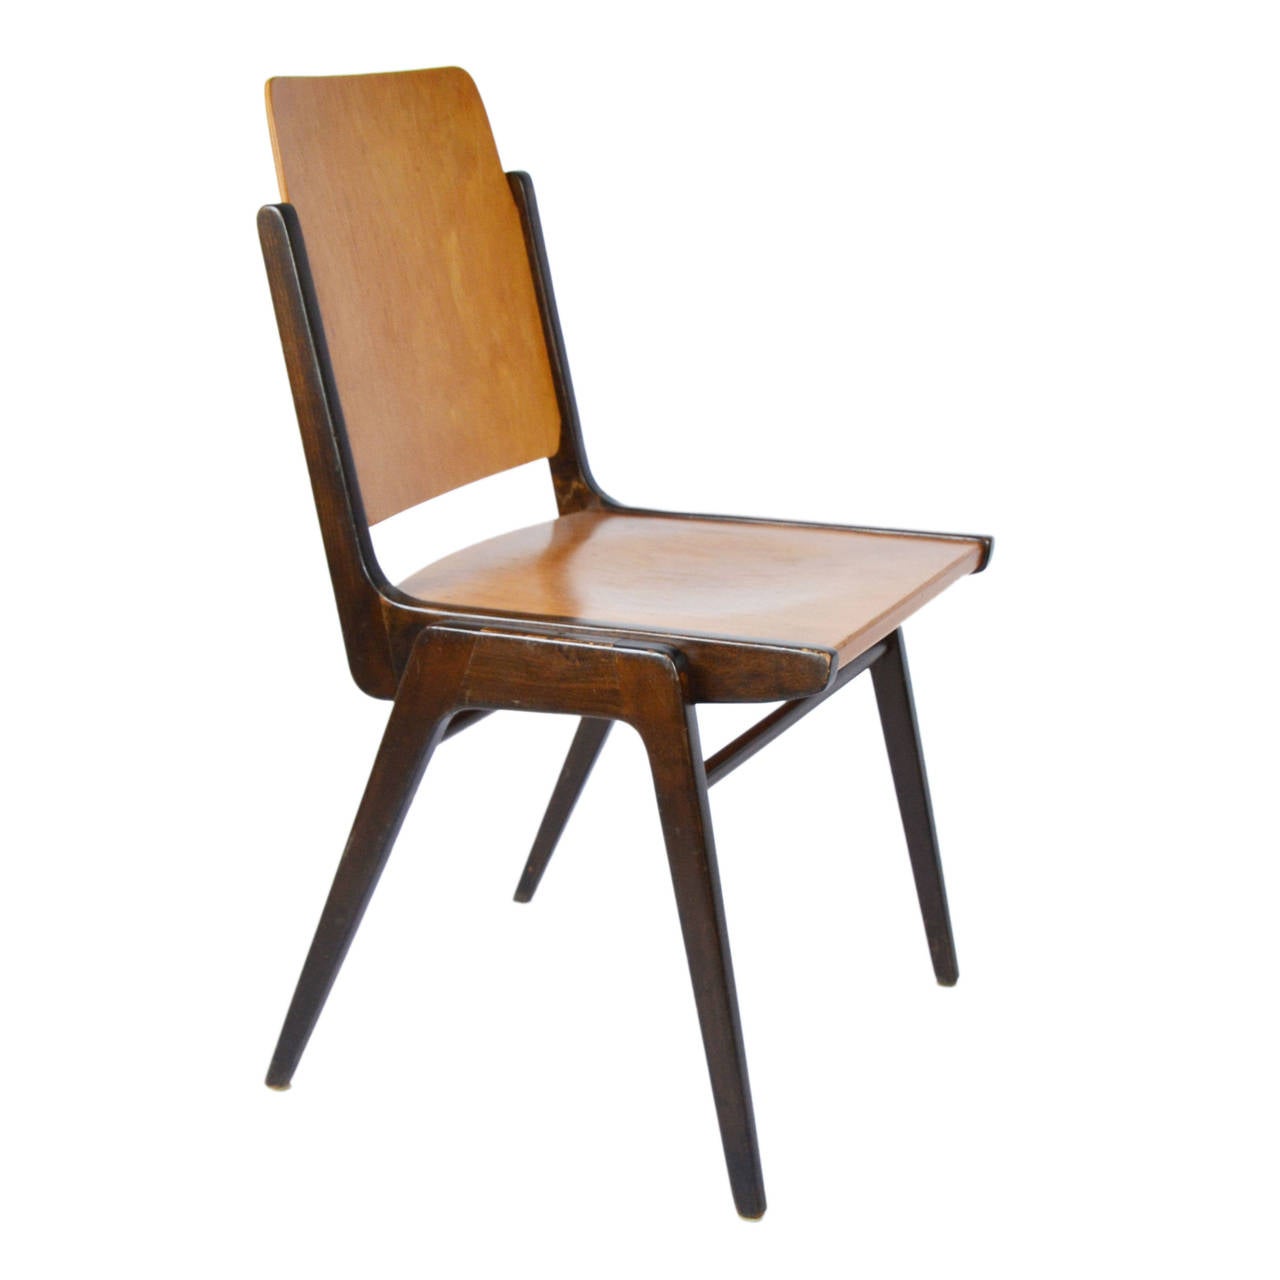 Mid-Century Modern One of 12 Stacking Chairs Franz Schuster, Bicolored Beech, Austria, 1959 For Sale